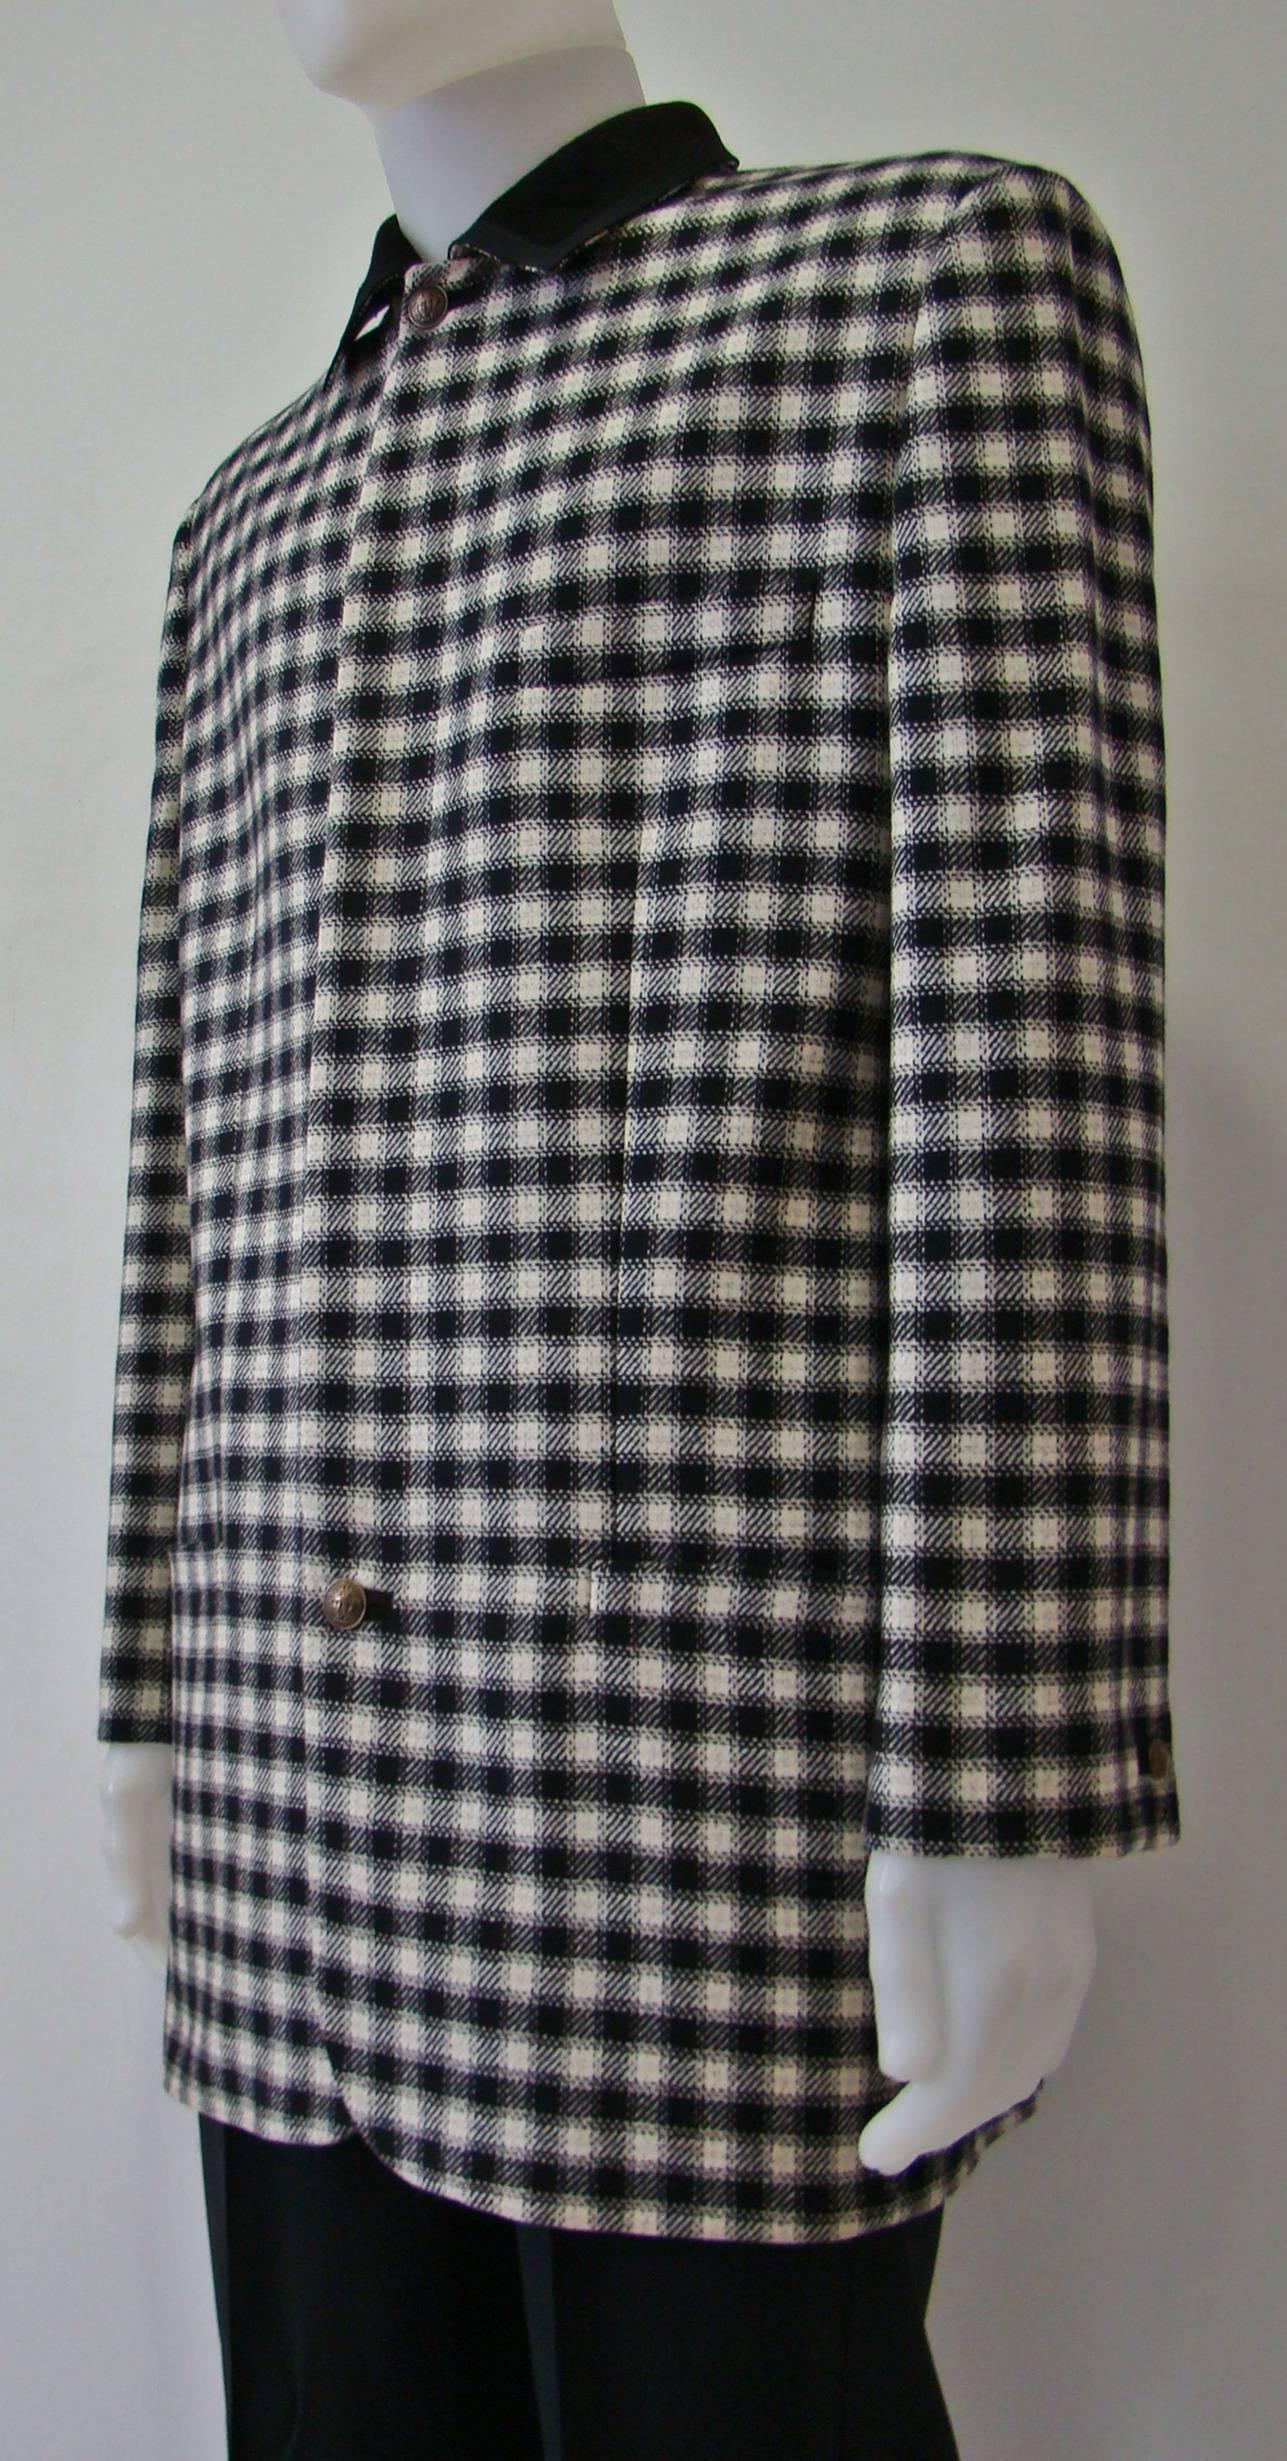 Gianni Versace Checked Jacket Bondage Collection Fall 1993. 100% Wool Jacket Featuring Two Small Medusa Button One In The Collar, One In The End And Two Unfunctional Buttons At Sleeves, With A Contrasting Classic Collar Created From Black Suede.